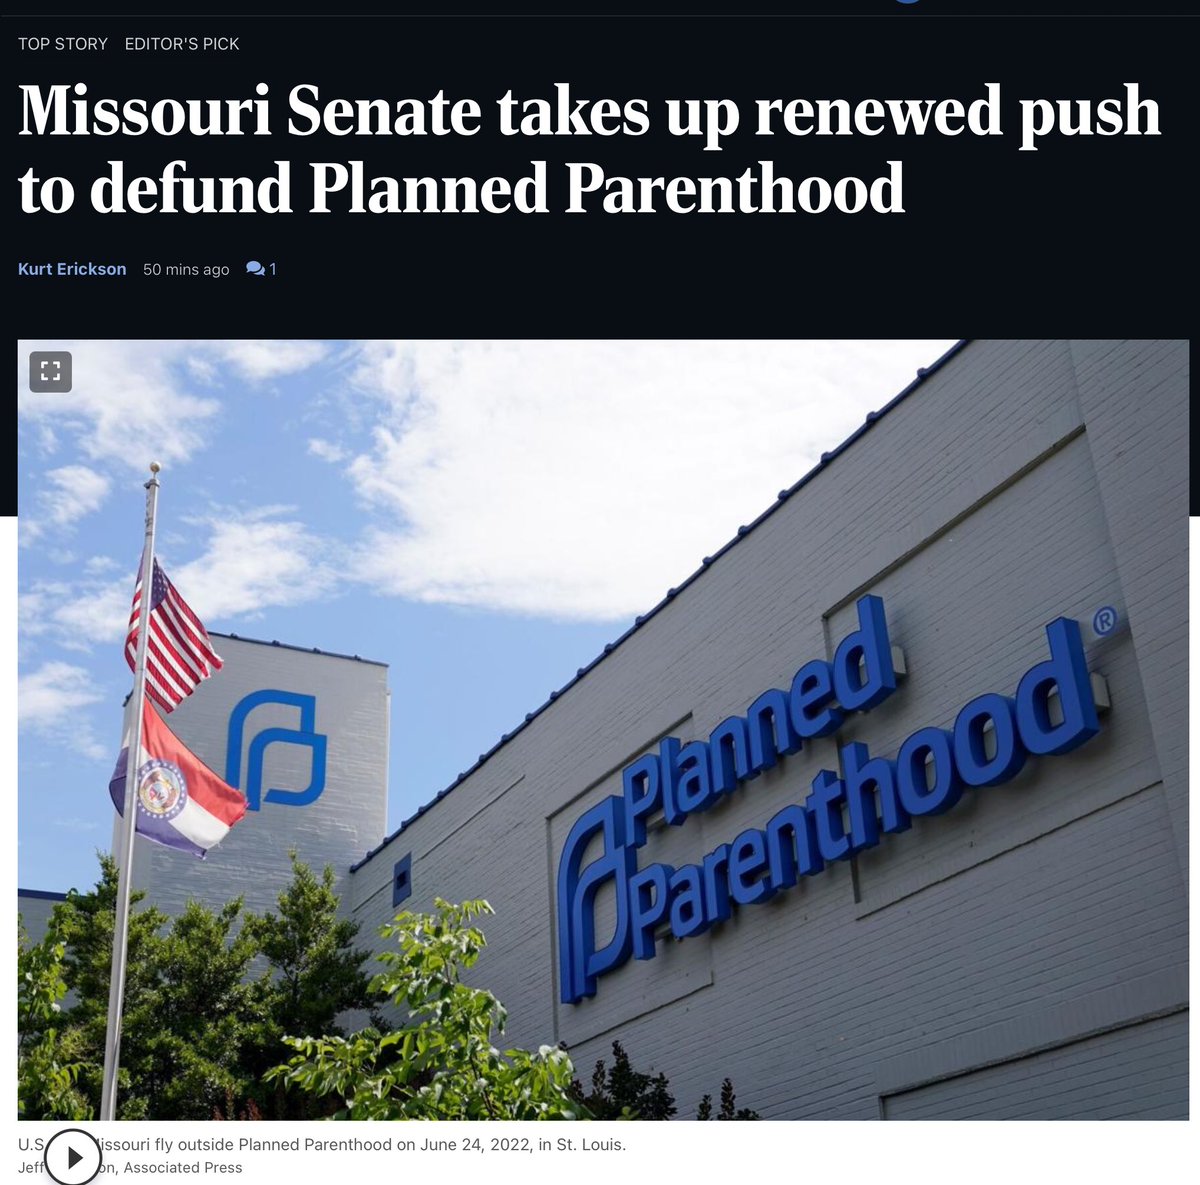 Defunding Planned Parenthood limits access to complete reproductive care (vasectomies, tubal ligations, contraceptives) in areas where the only other choice is a Catholic hospital. #moleg stltoday.com/news/local/gov…